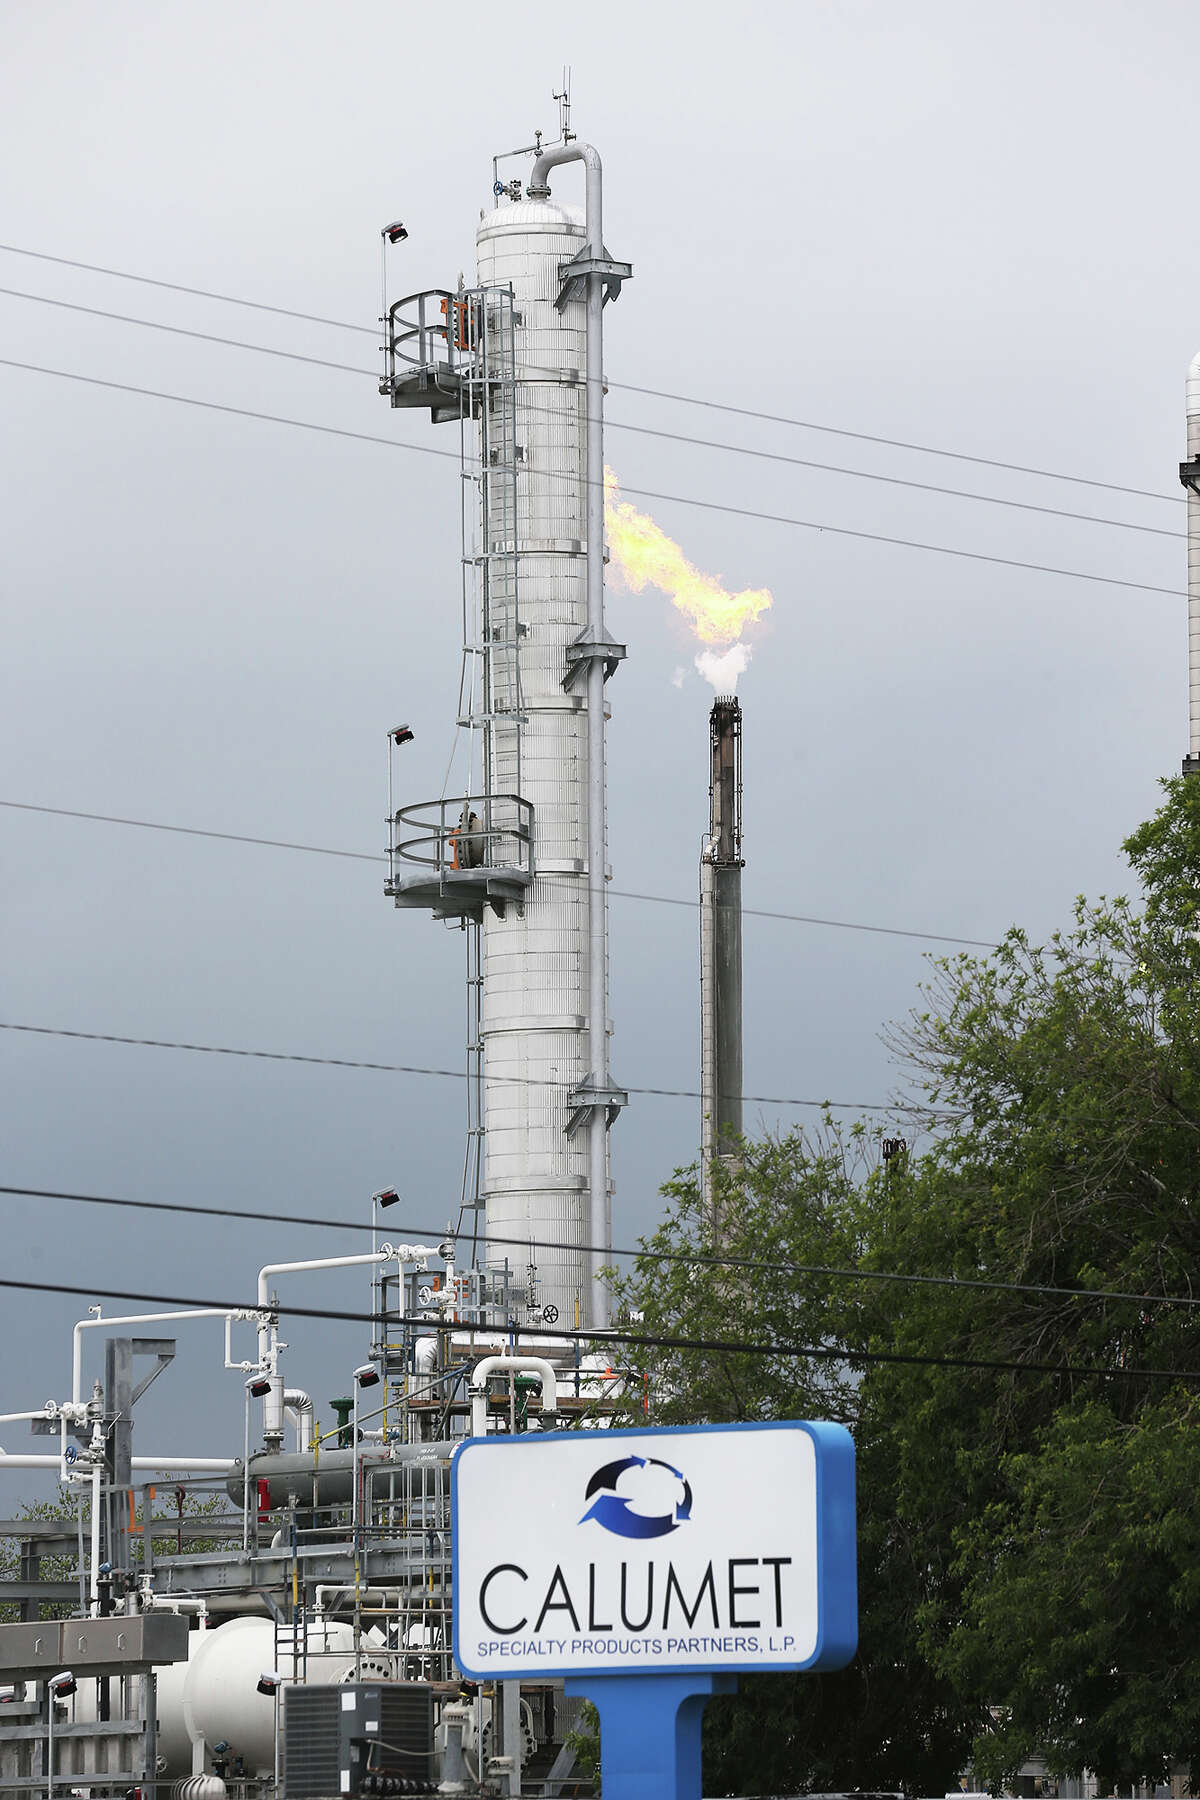 A flare from the Calumet Specialty Products Partners plant is seen near the Mission Reach of the San Antonio River in April 2014 when a second jet fuel spill happened.